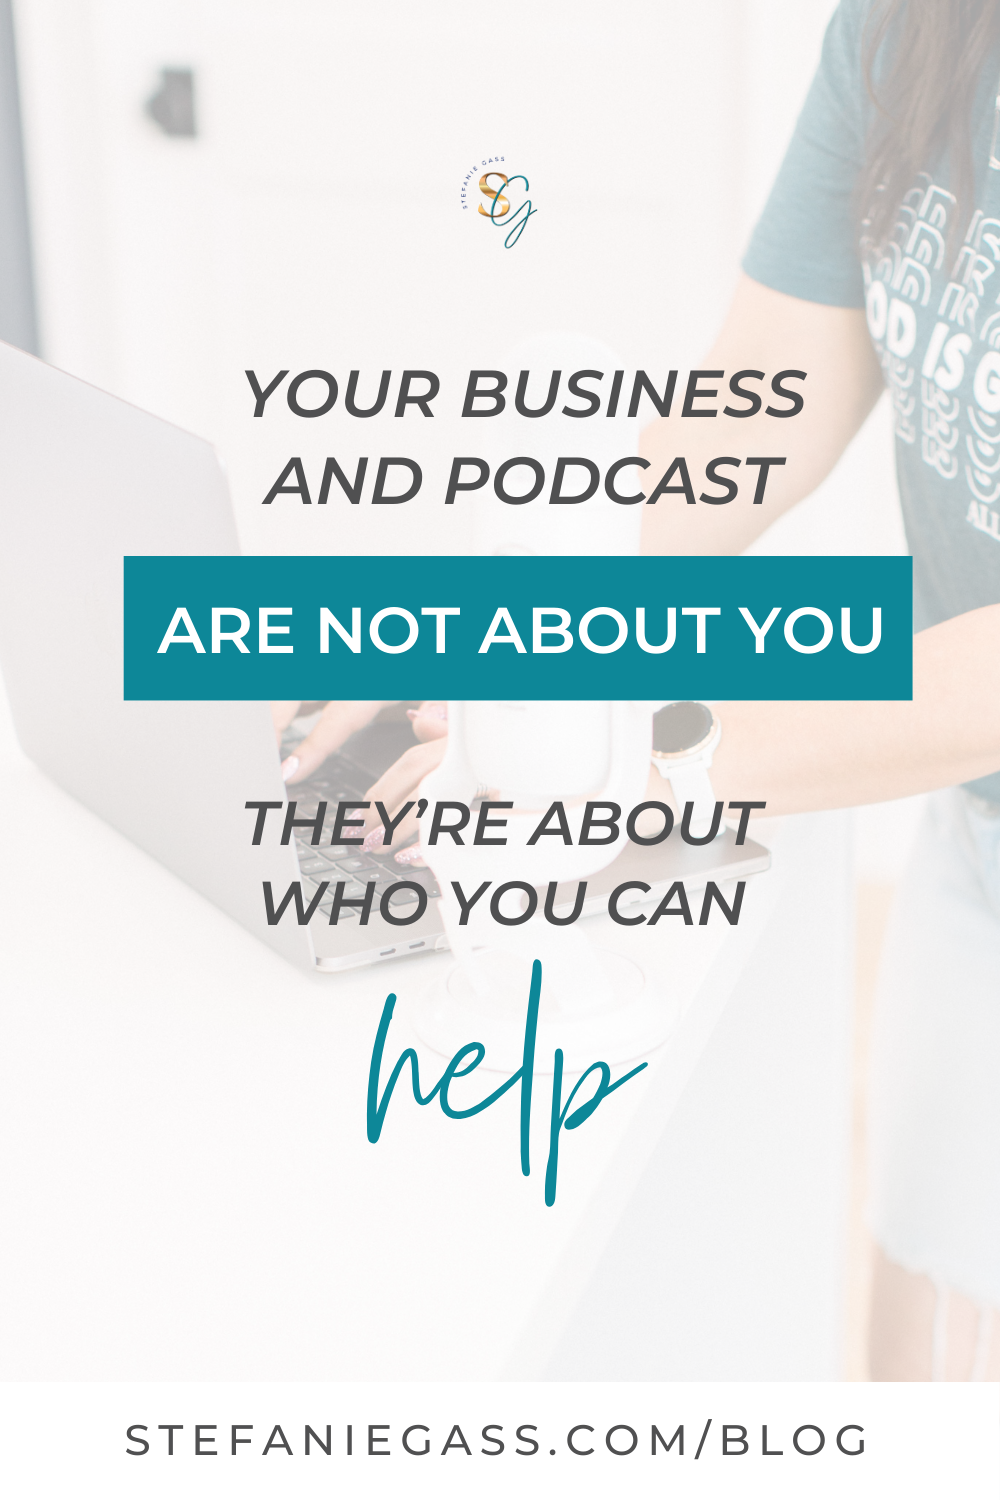 Stefanie Gass Quote:  Your business and podcast are not about you. They're about who you can help.